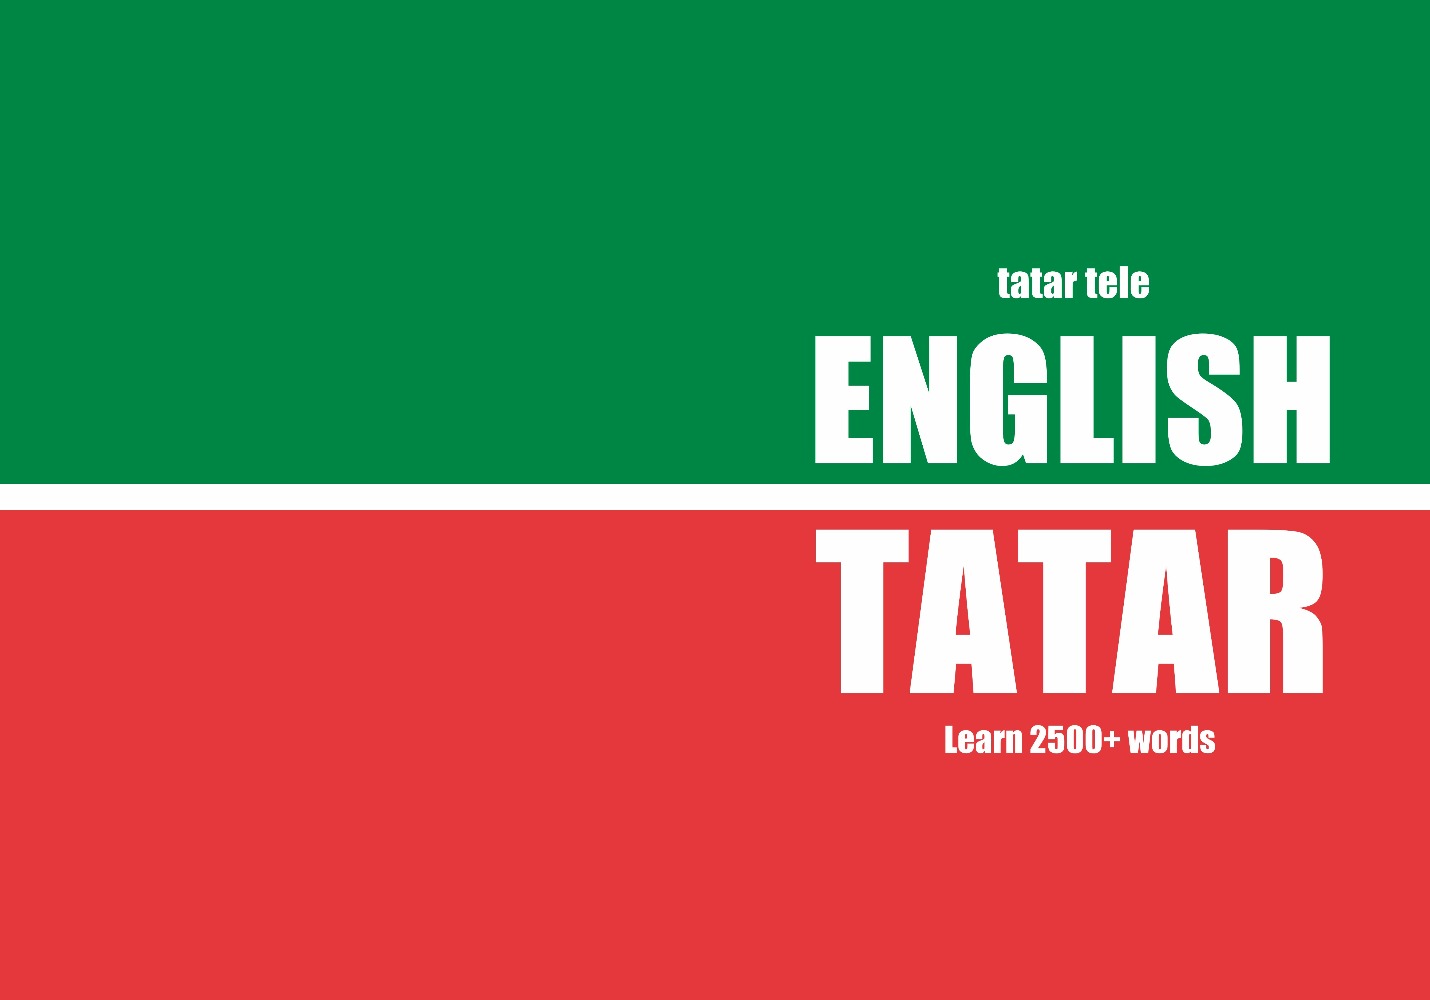 Tatar language learning notebook cover